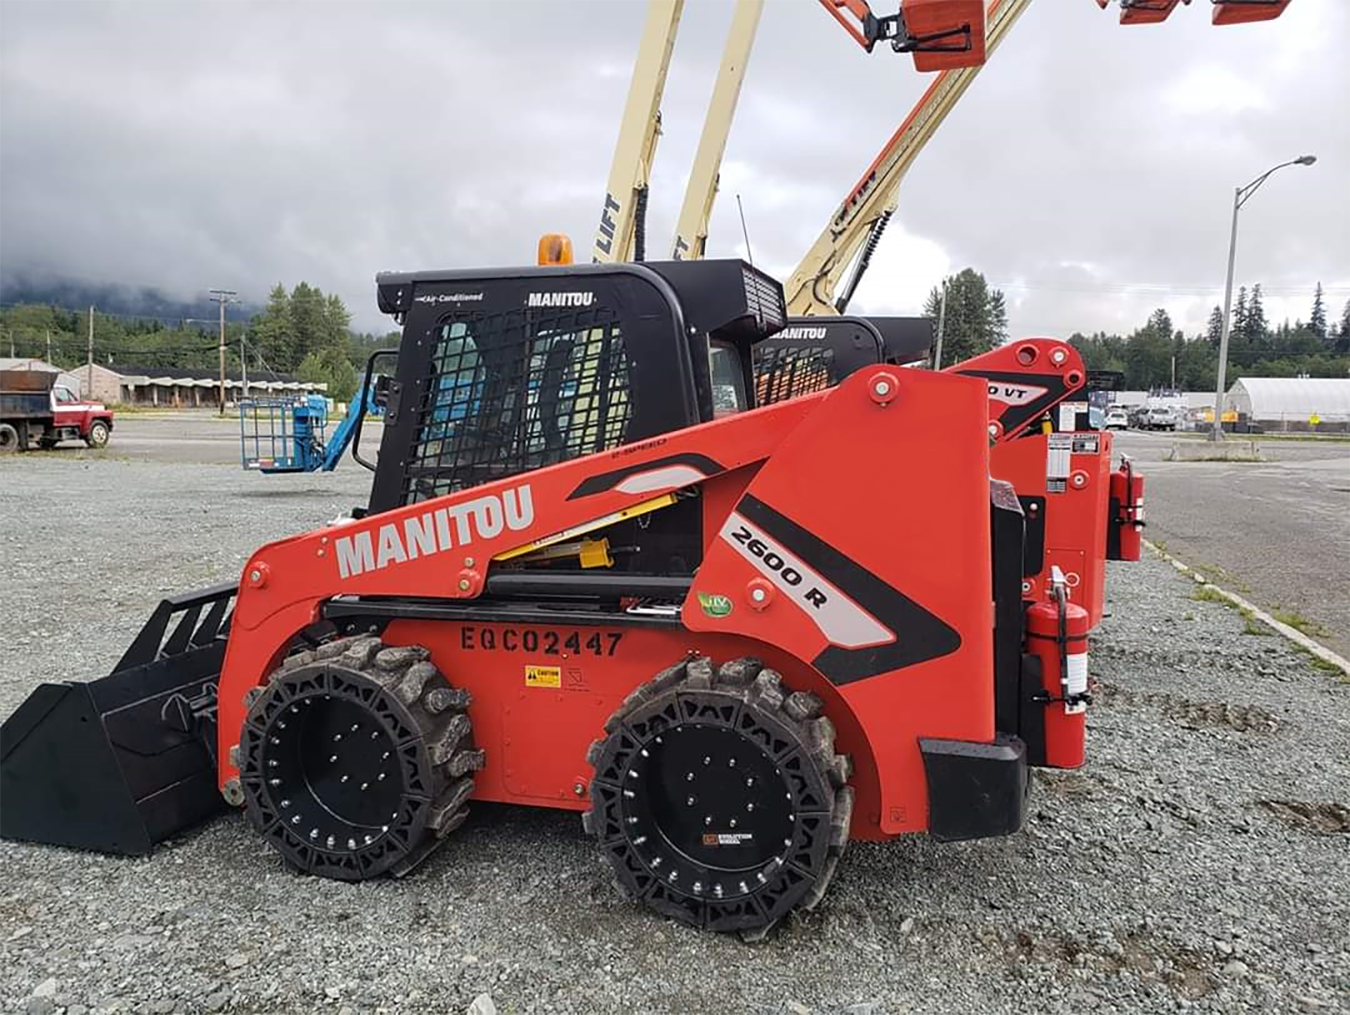 In this image, we see a Red Manitou Skid Steer mounted with Bobcat skid steer tires